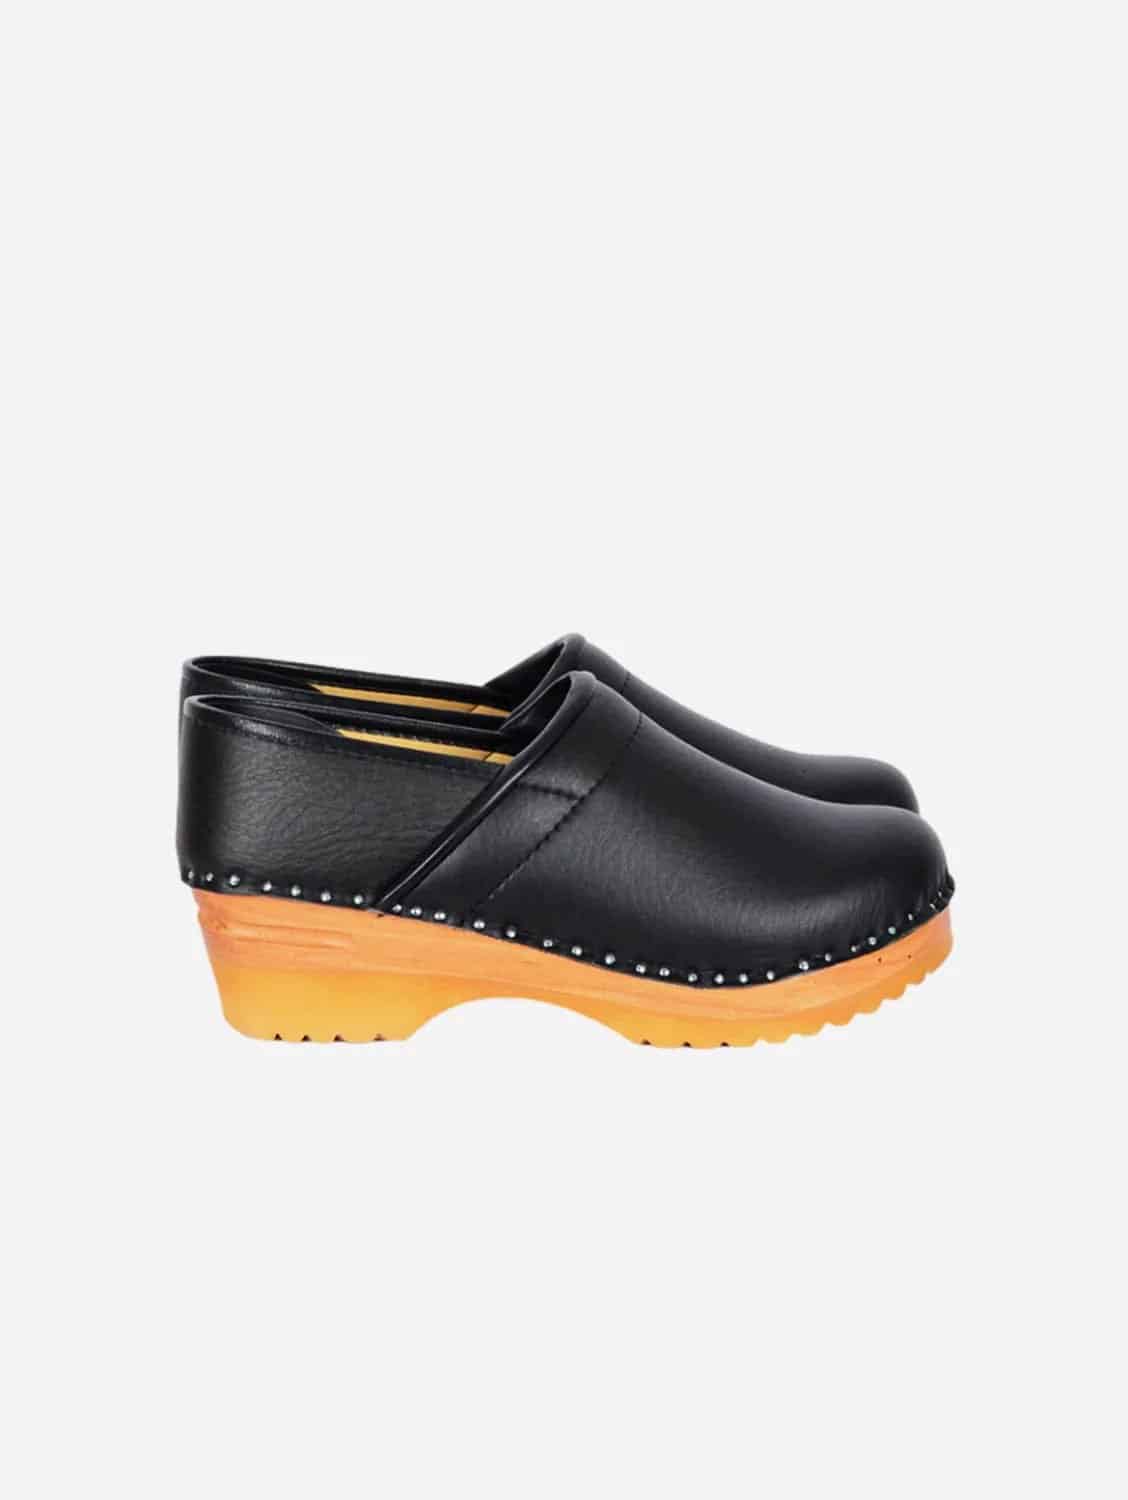 Vegan black leather clogs (Van Gogh by Good Guys Dont wear leather)